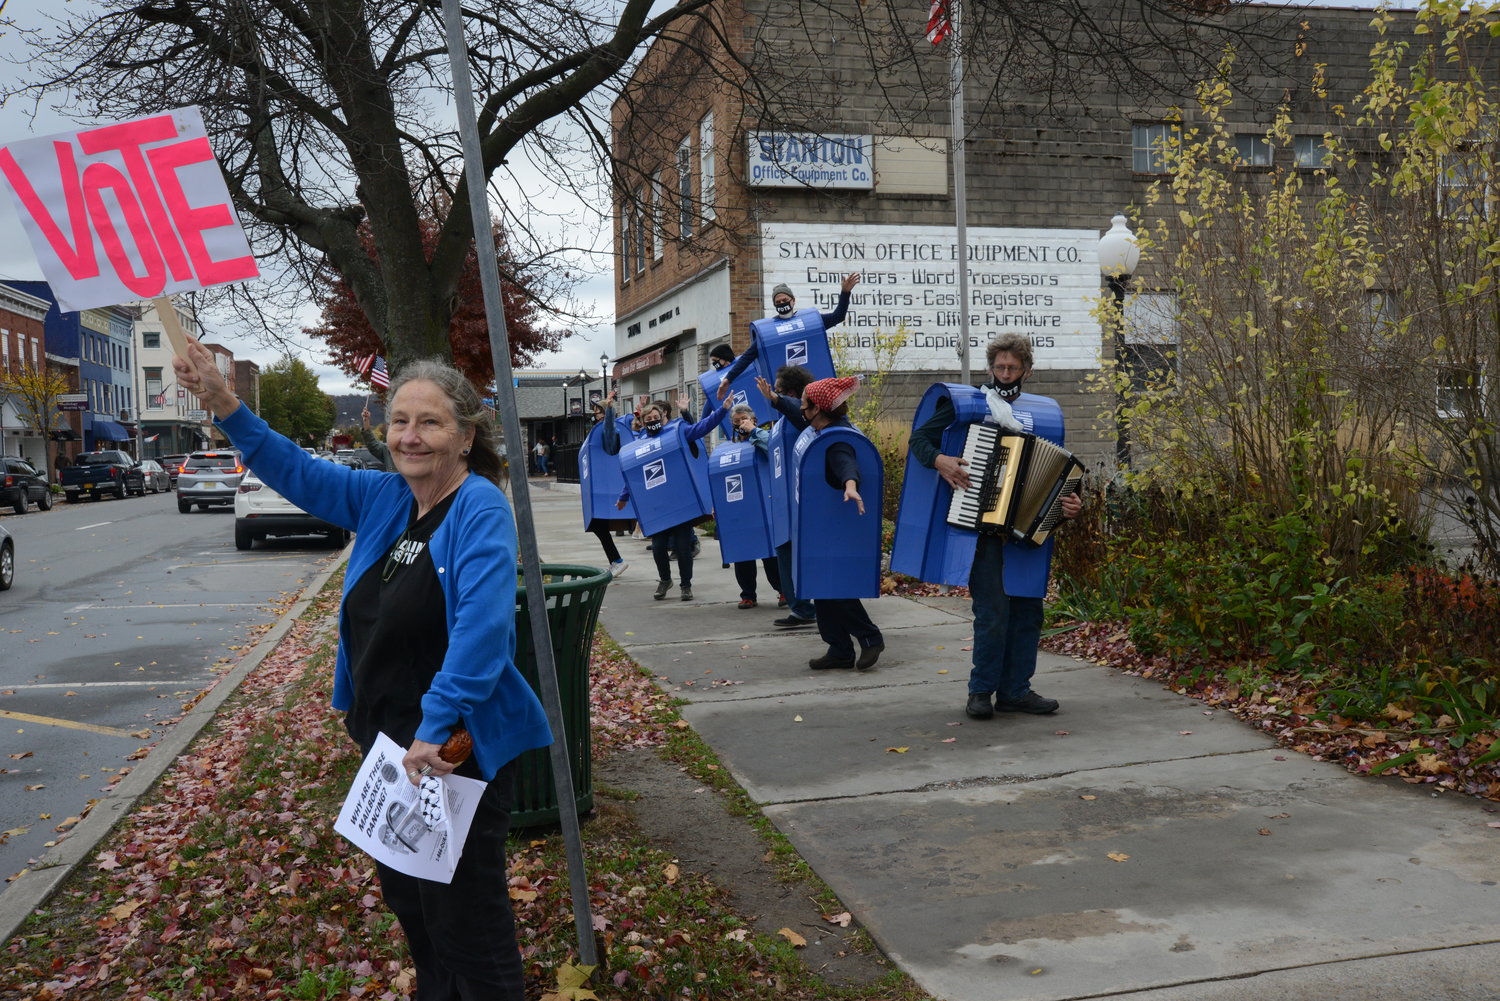 The dancing mailboxes made their way from Honesdale to Hawley to spread the word about voting this election.